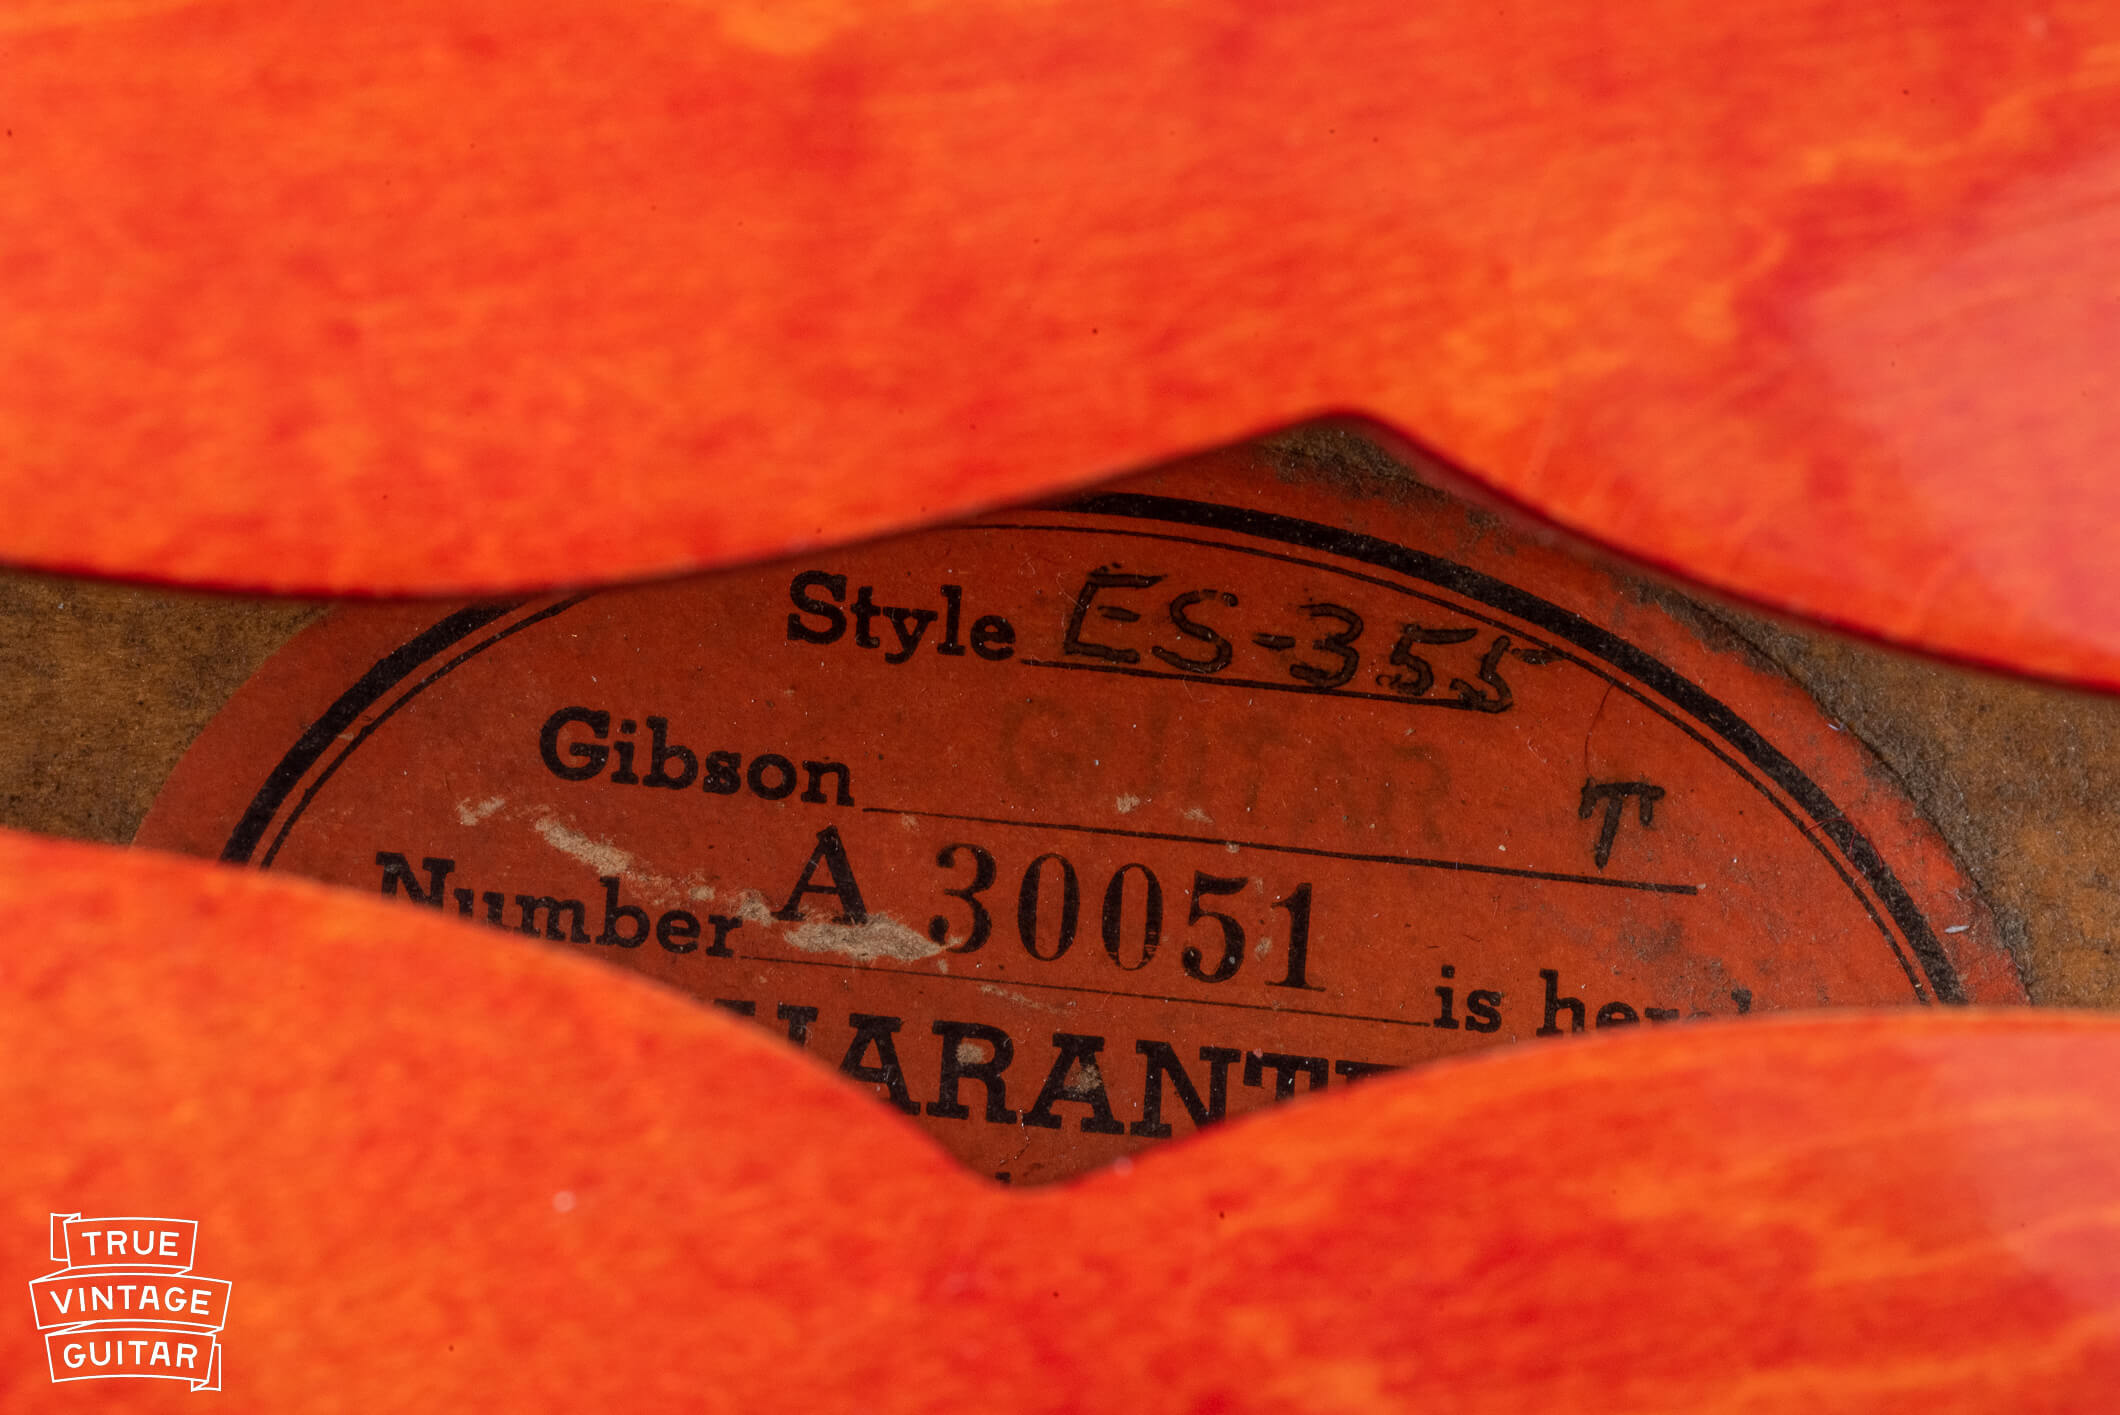 1959 Gibson Serial Number A30051